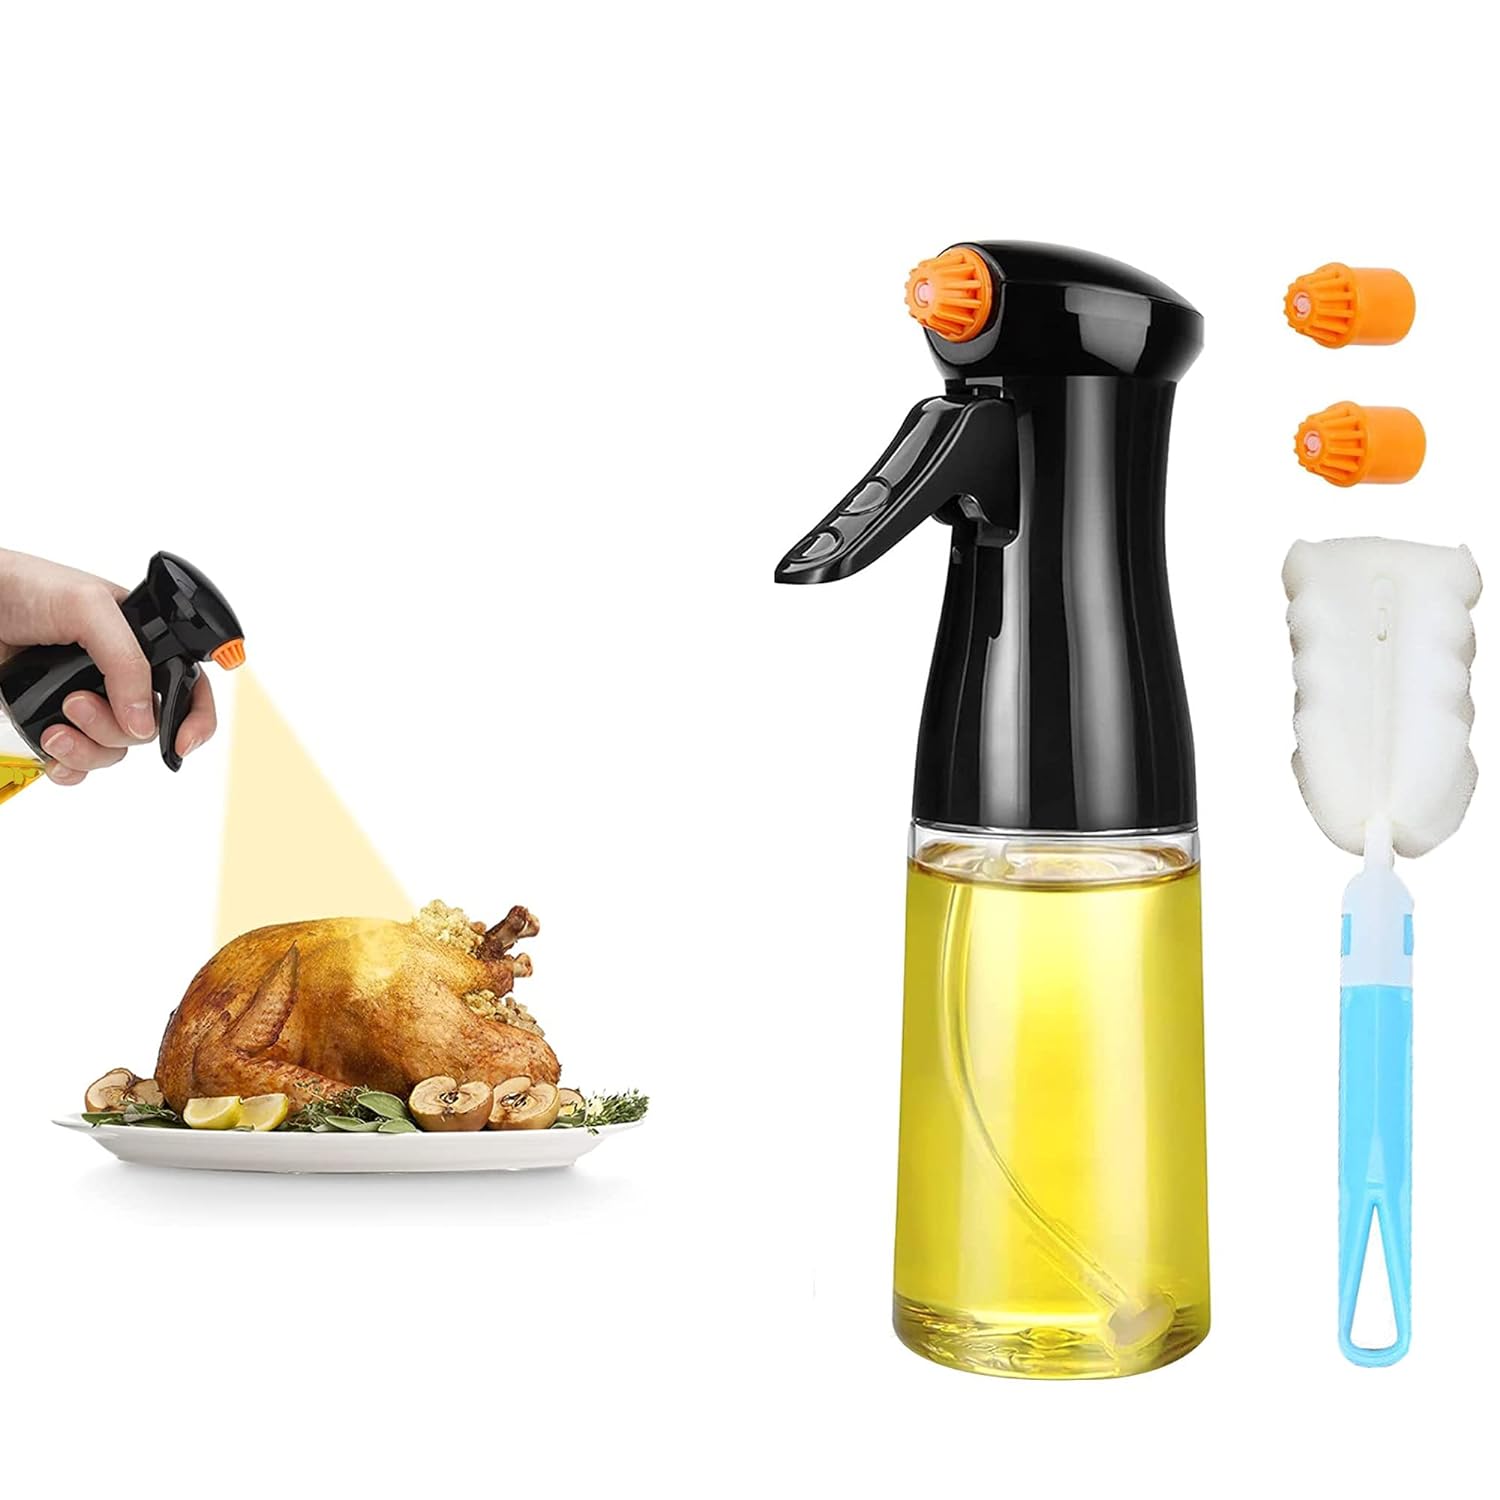 Great Choice Products Mogul Passion Oil Sprayer For Cooking – Olive Oil Sprayer – Refillable Oil Vinegar Spritzer Sprayer Bottle For Cooking, …